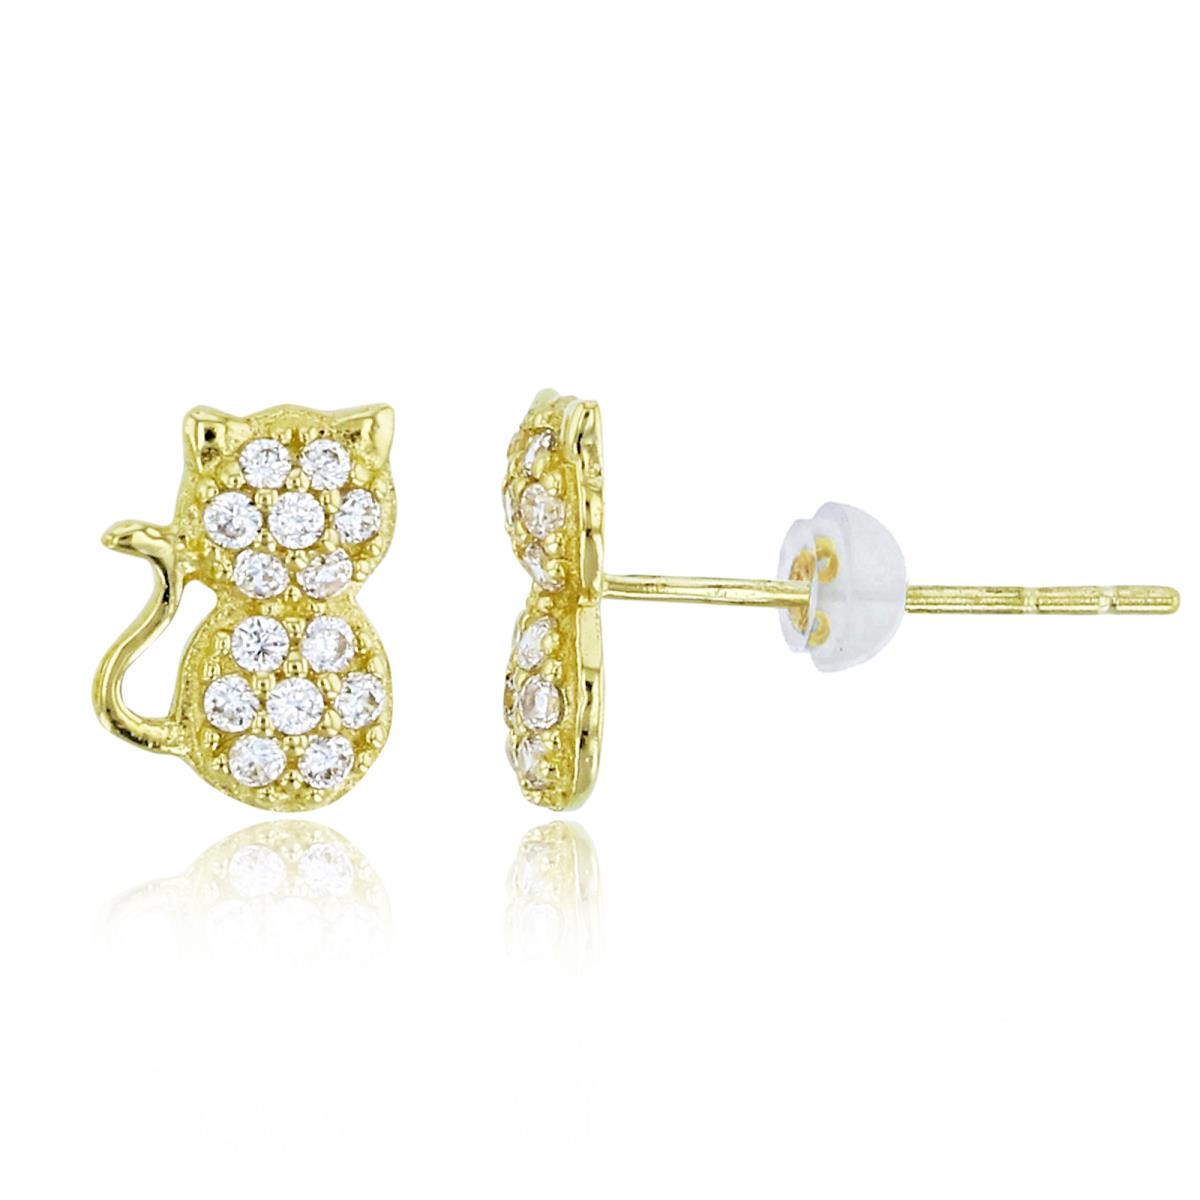 10K Yellow Gold Rnd CZ Pave Kitten Studs with Silicon Backs